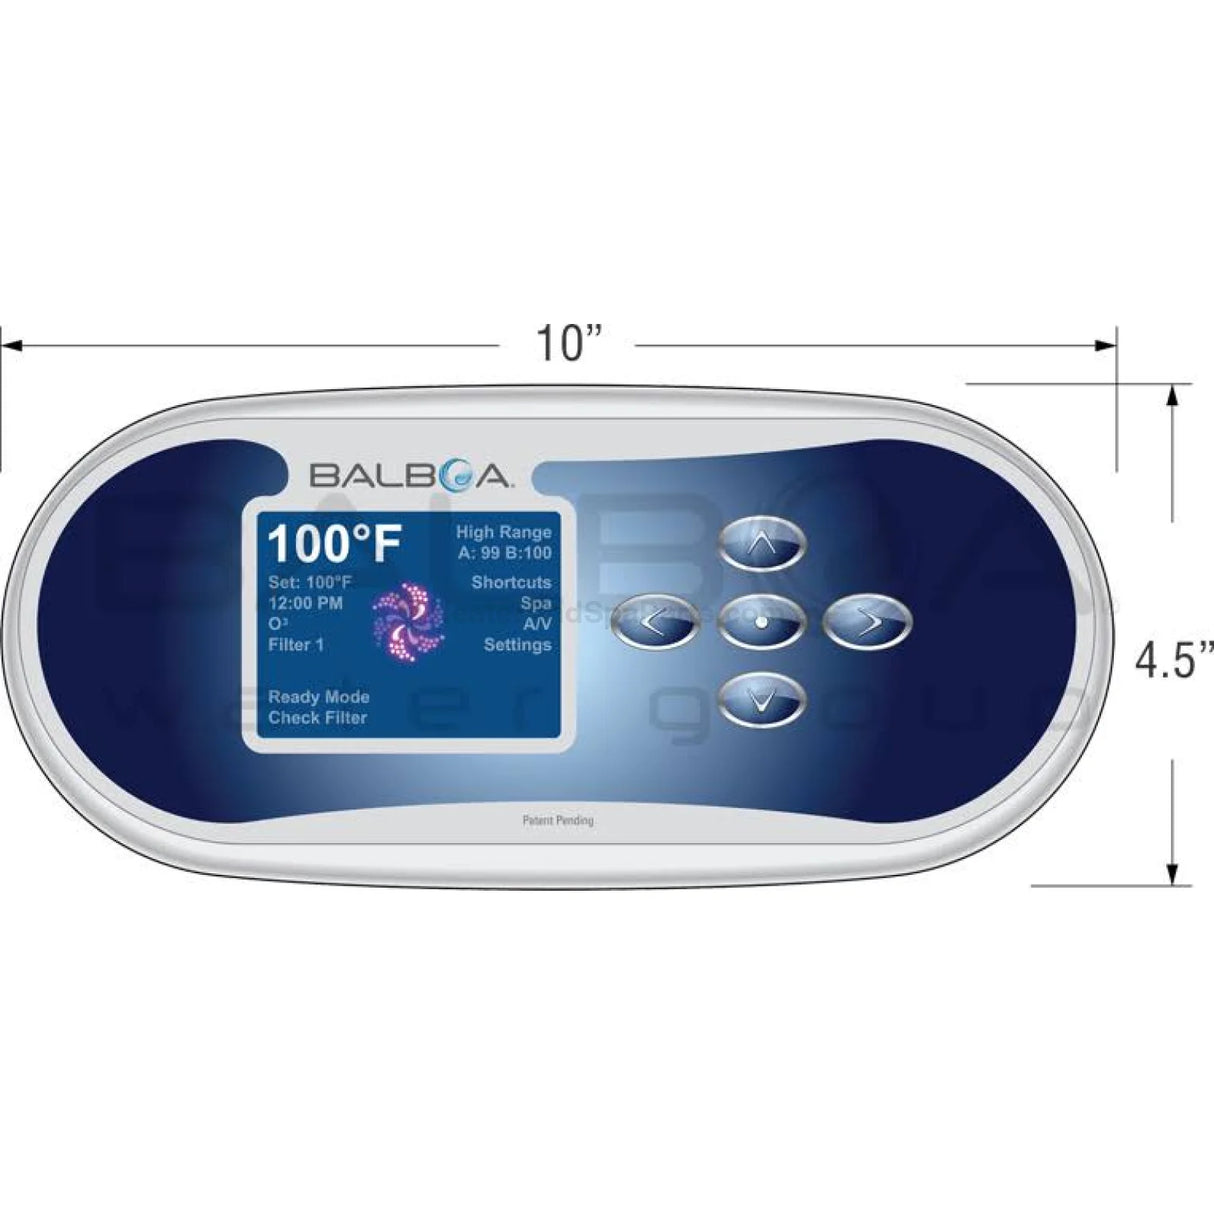 Balboa Tp 900 Colour Screen Touchpad - Bullfrog Maax Signature Spa Industries Touchpads